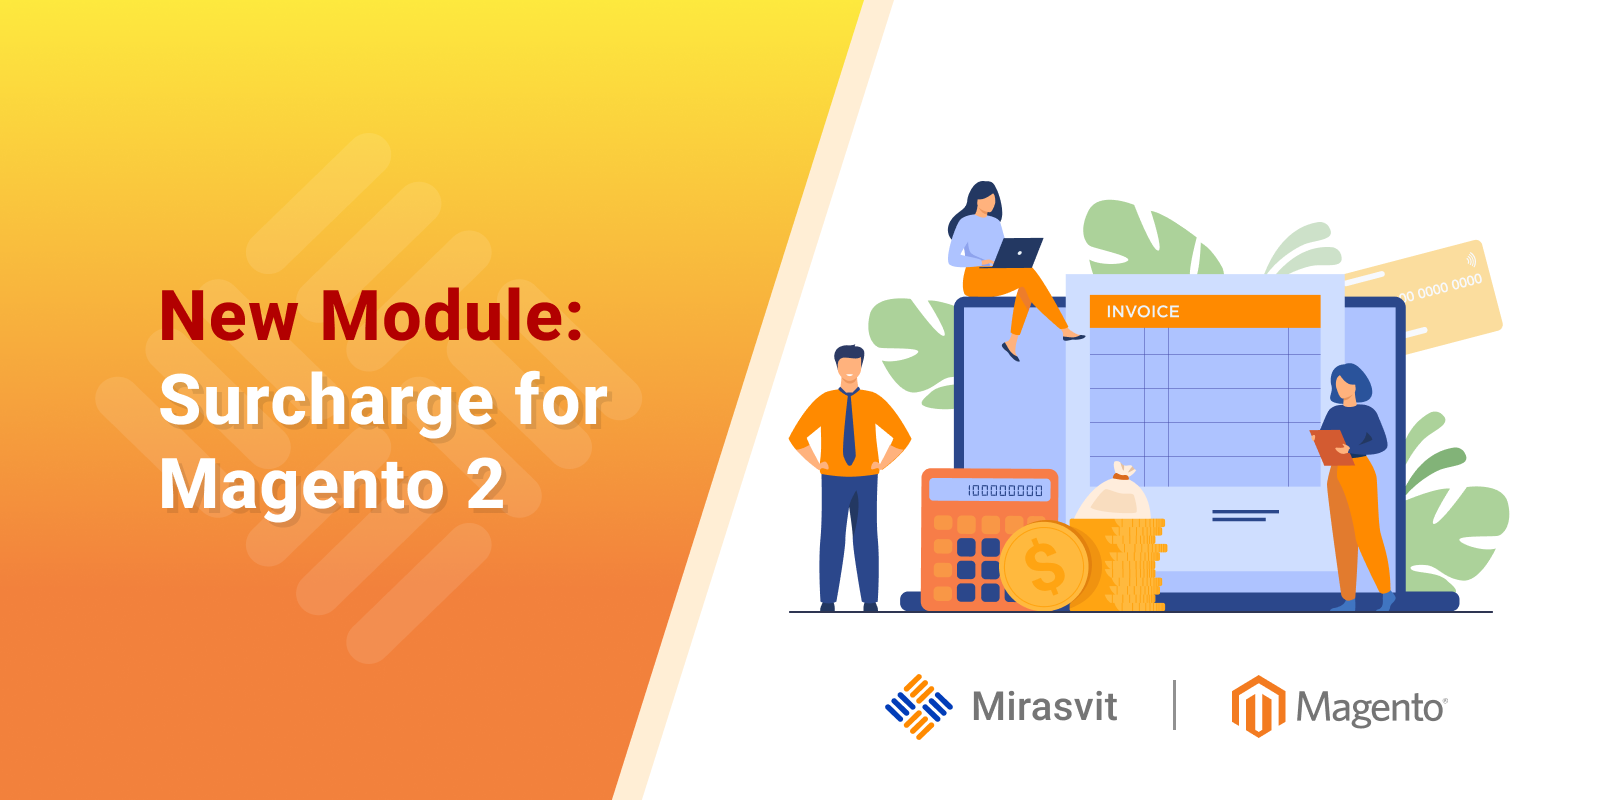 New Module: Magento 2 Surcharge